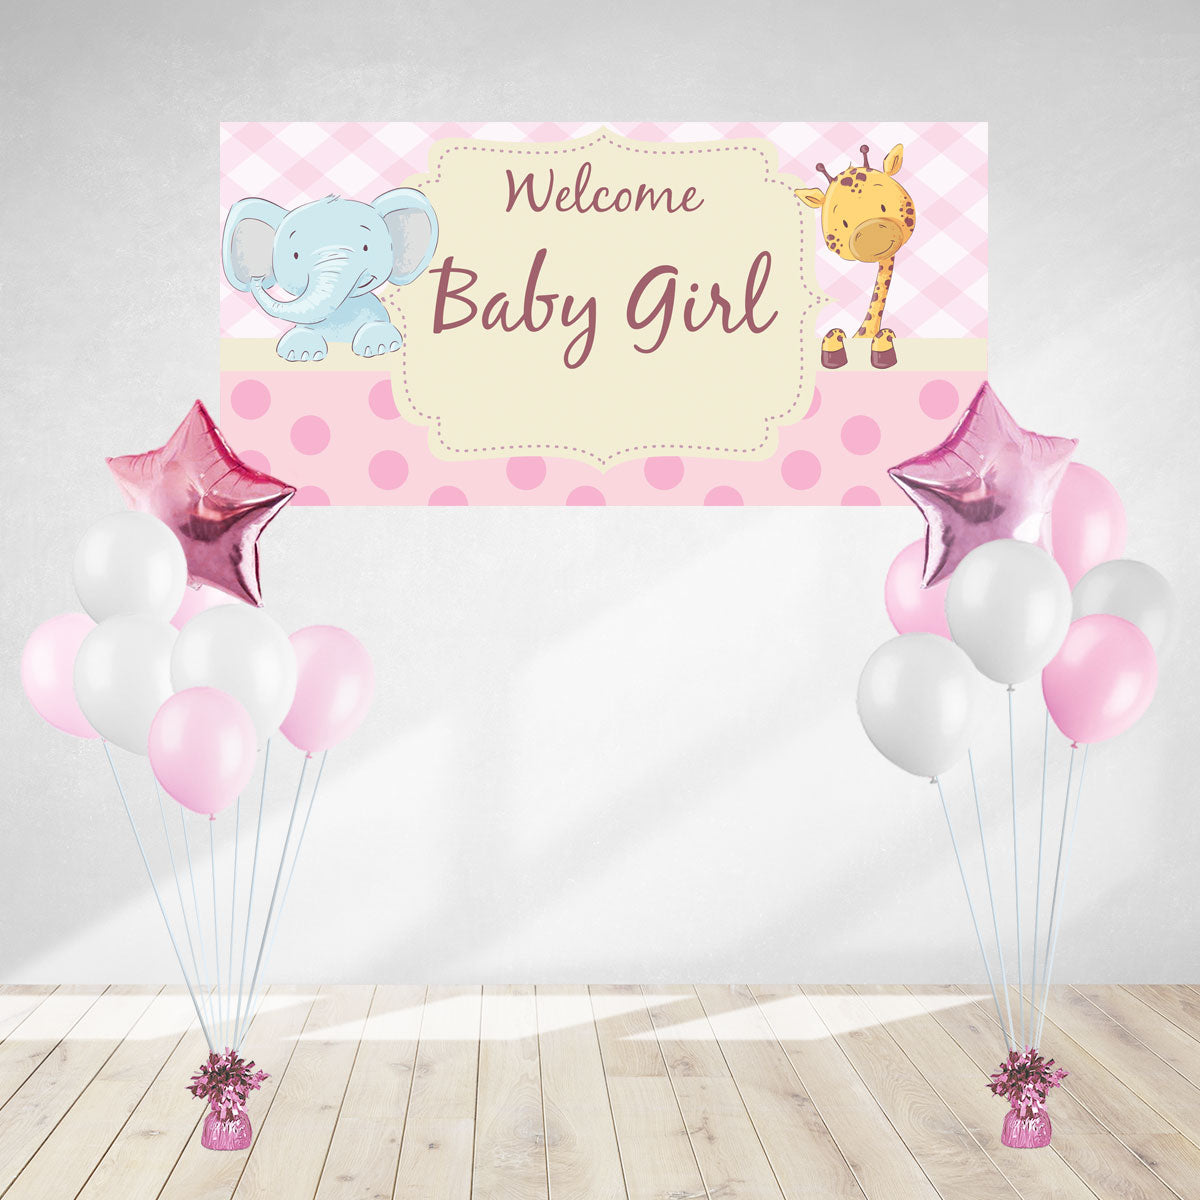 Cute Giraffe and Elephant banner for the welcome baby girl party. Comes with 2 sets of balloon bouquets.